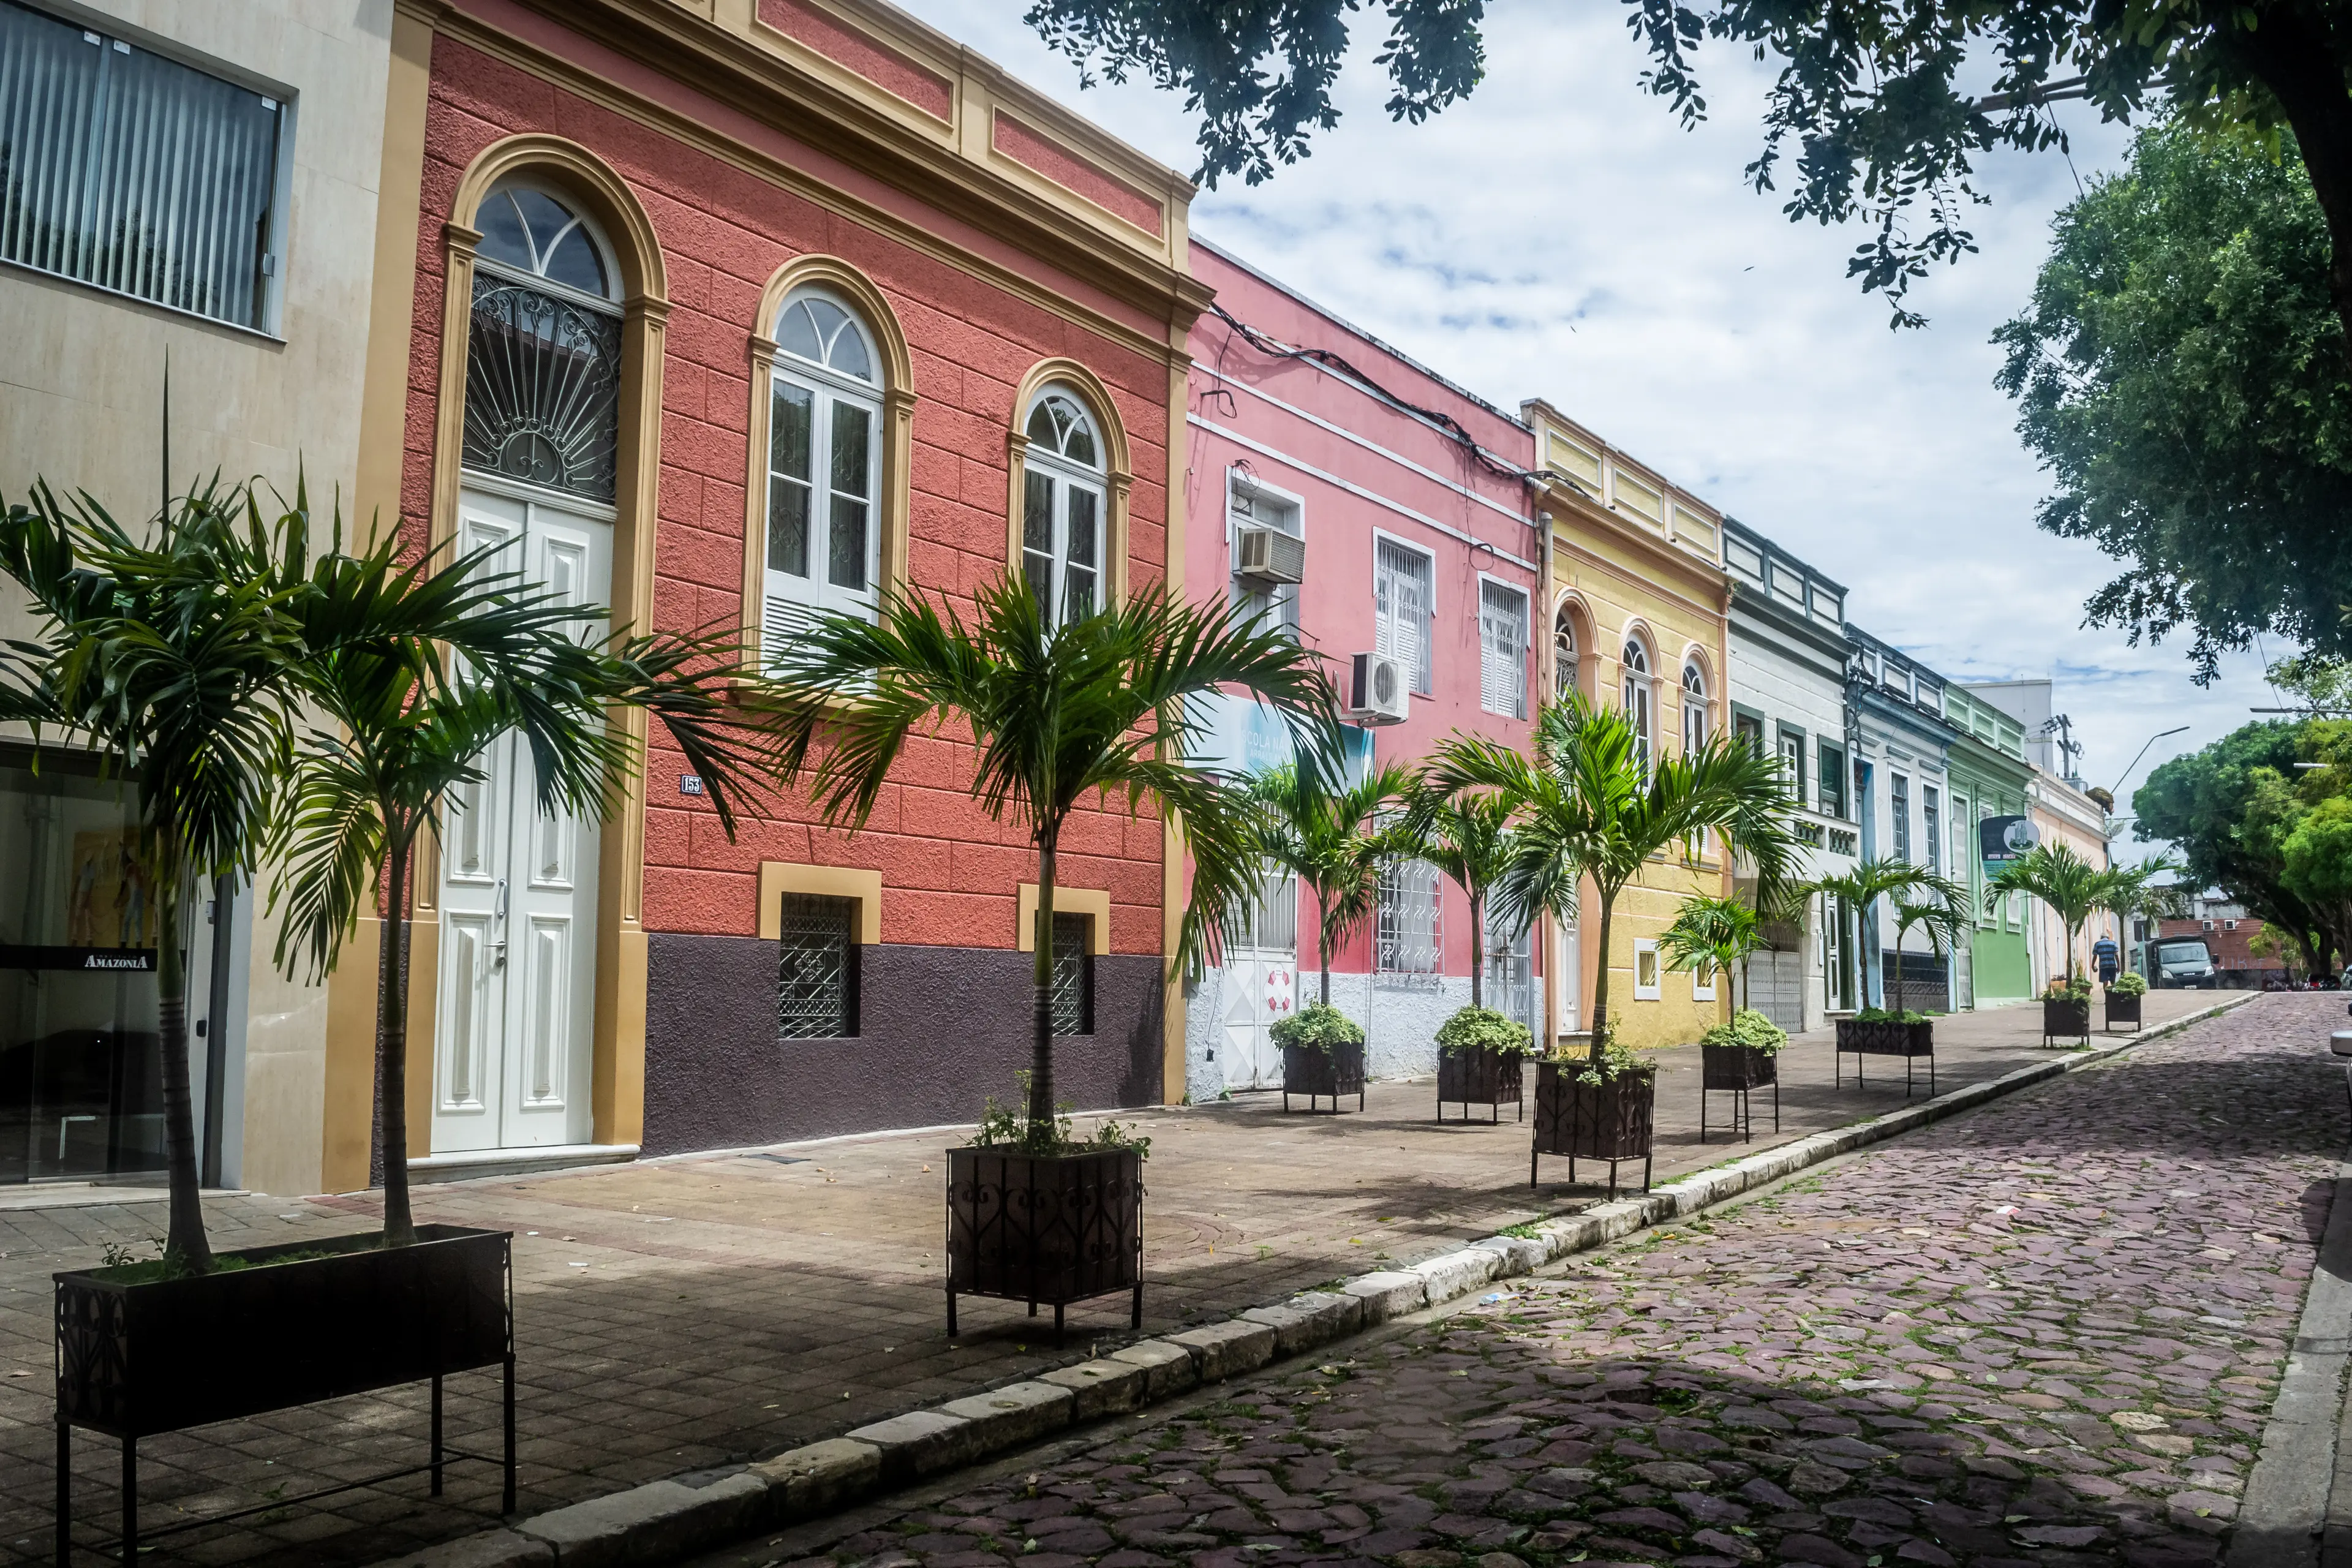 Cobblestone street with colorful houses at Manaus